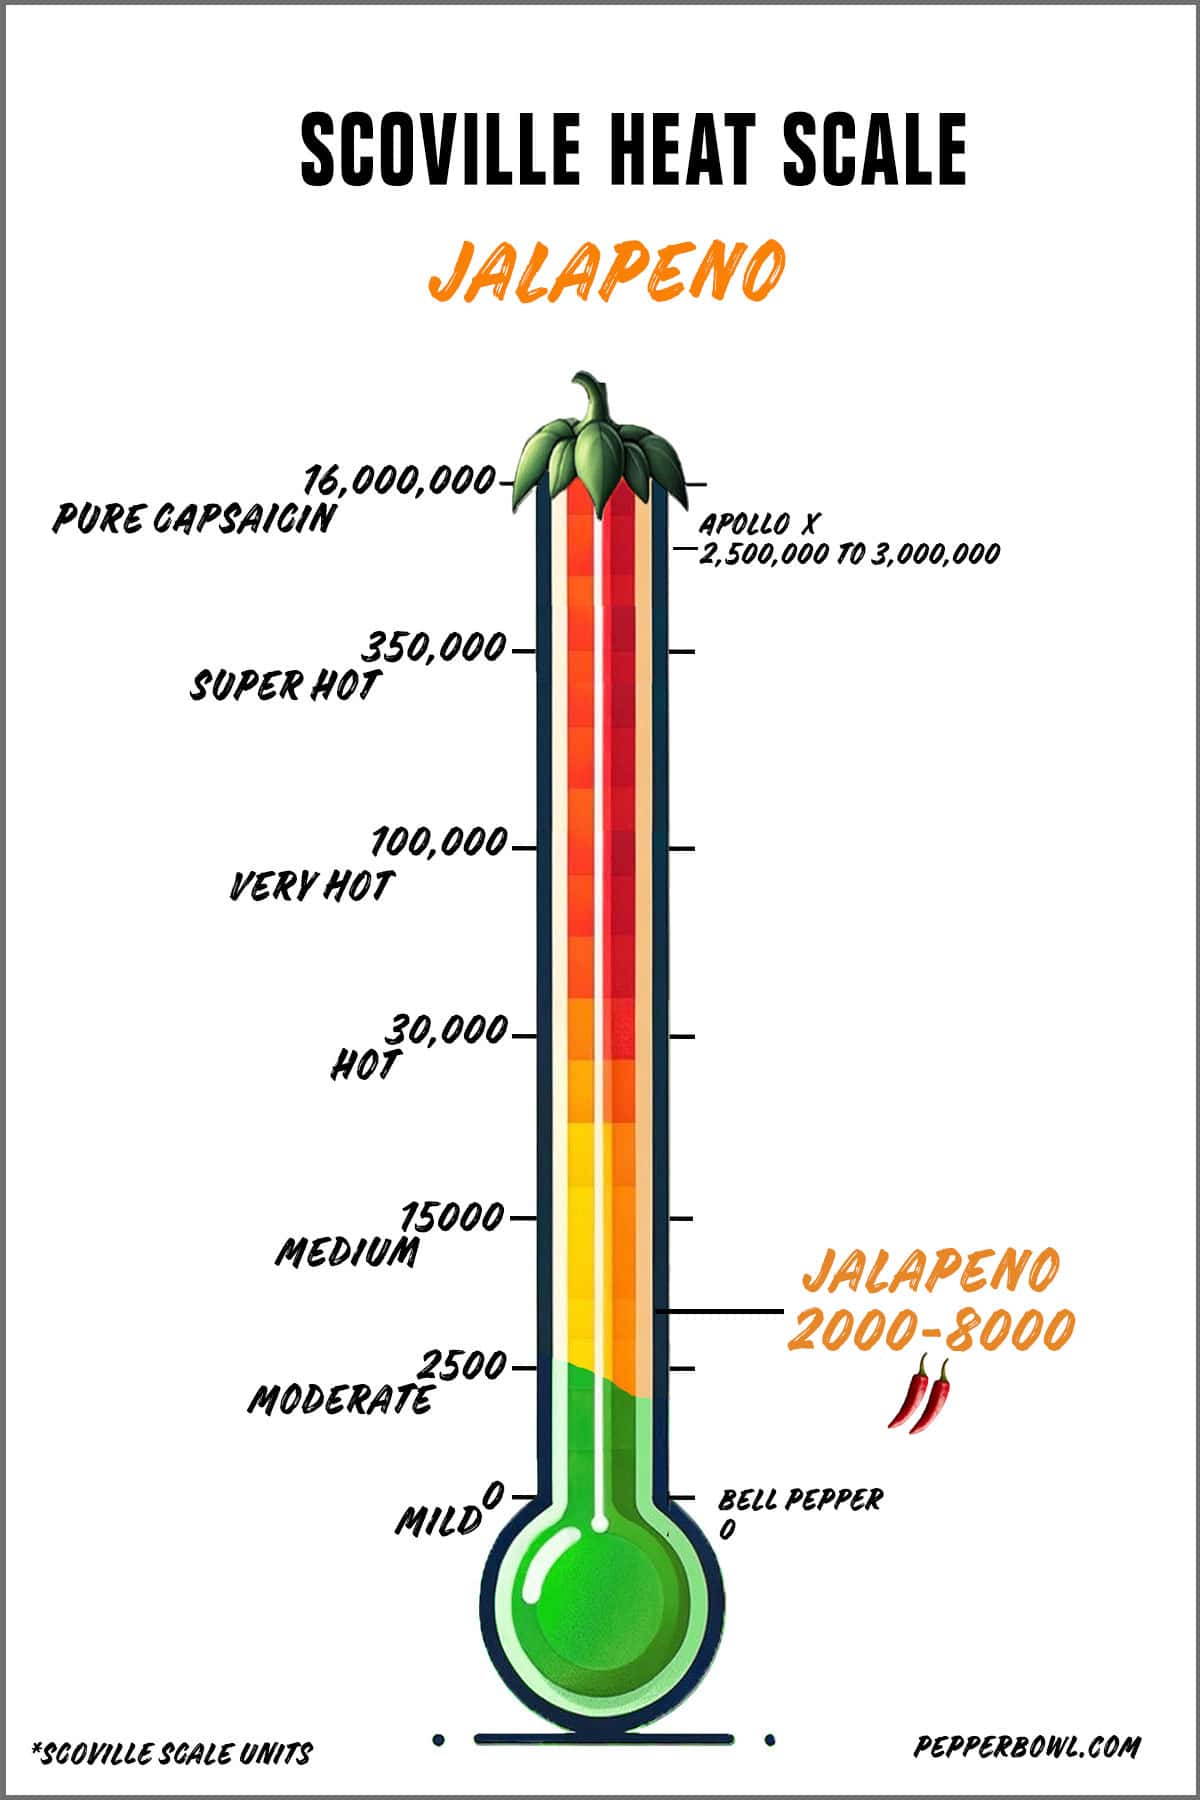 Illustration of the jalapeno in the Scoville scale, representing its heat intensity.